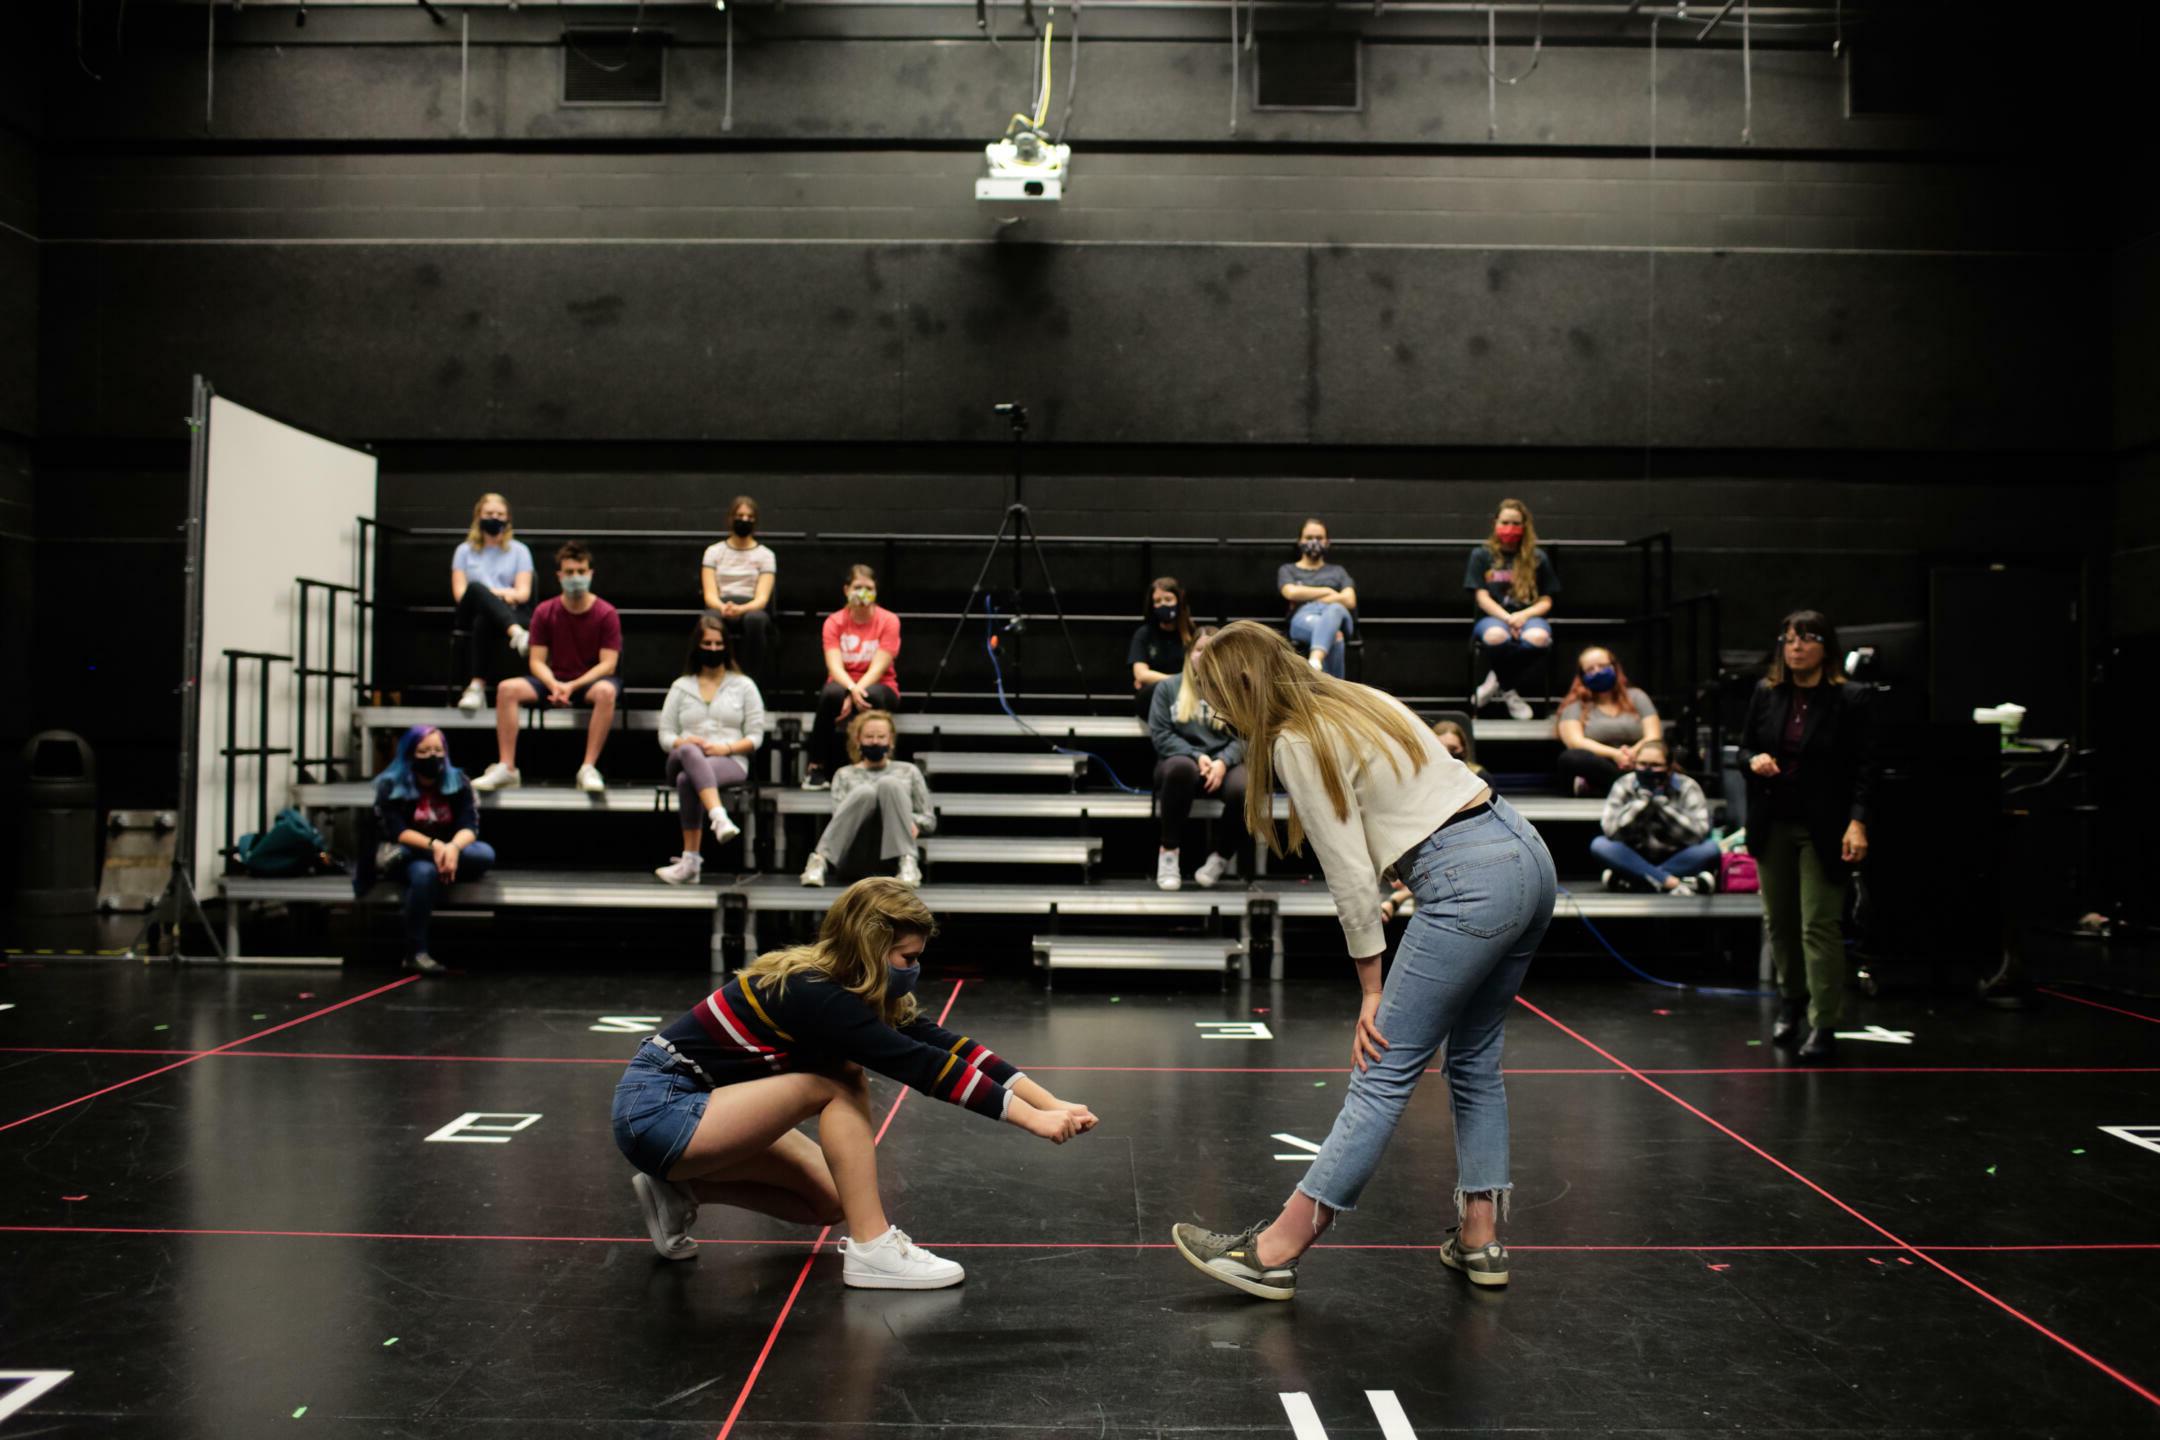 Students practicing in a blackbox theatre